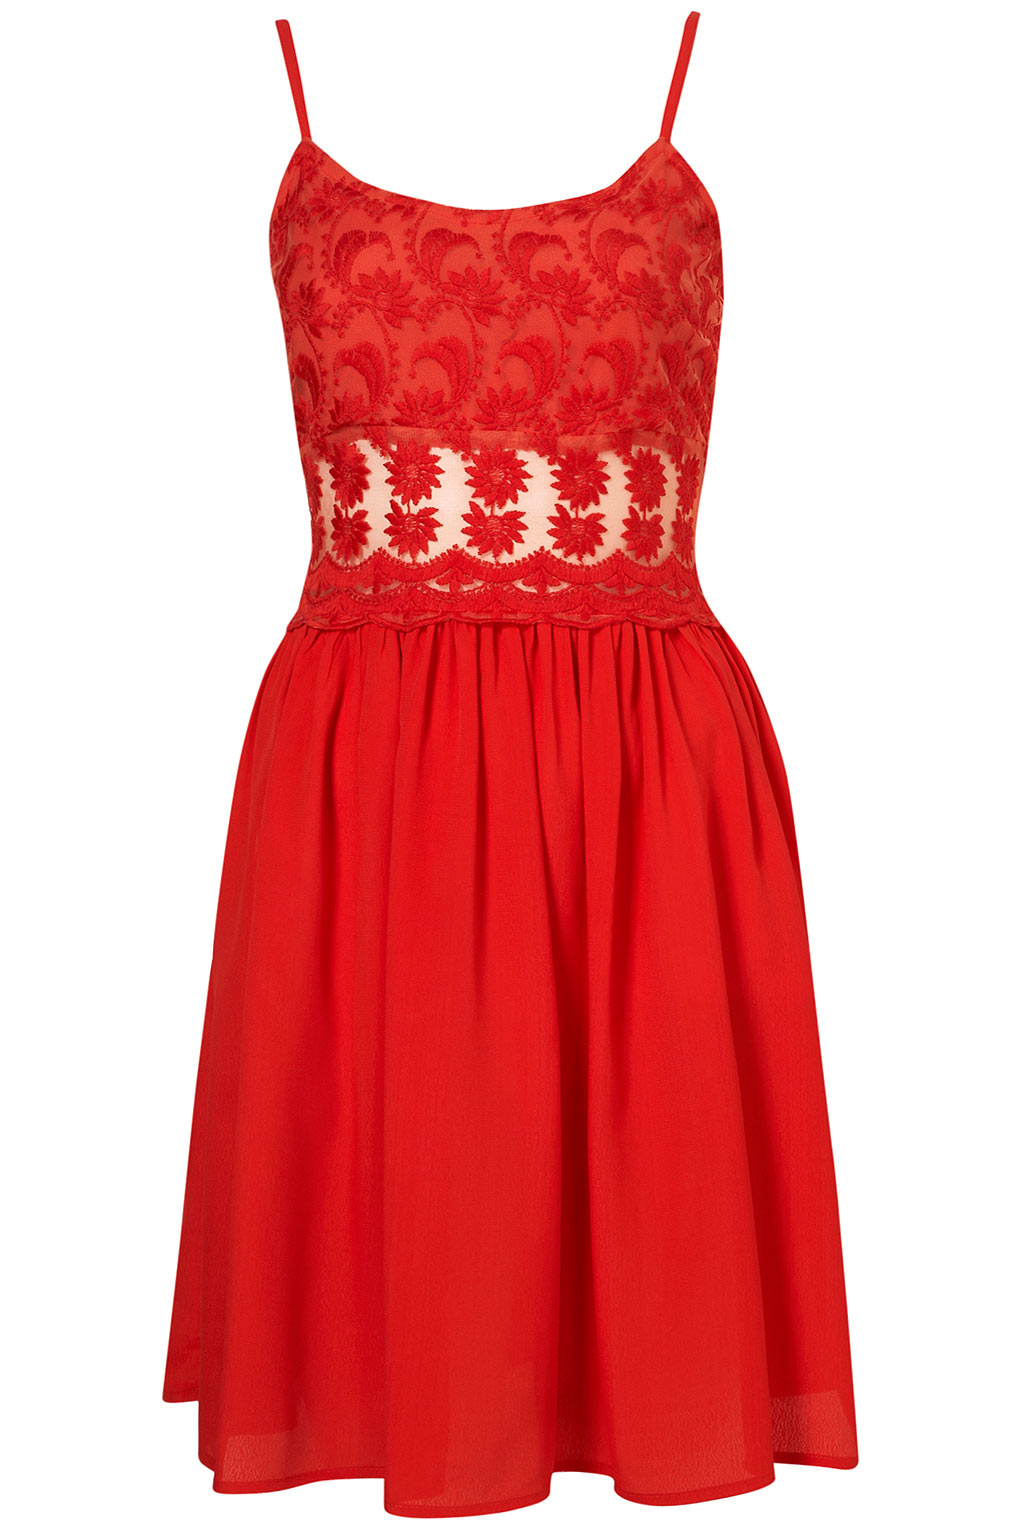 Lyst - Topshop Lace Strappy Sundress in Red